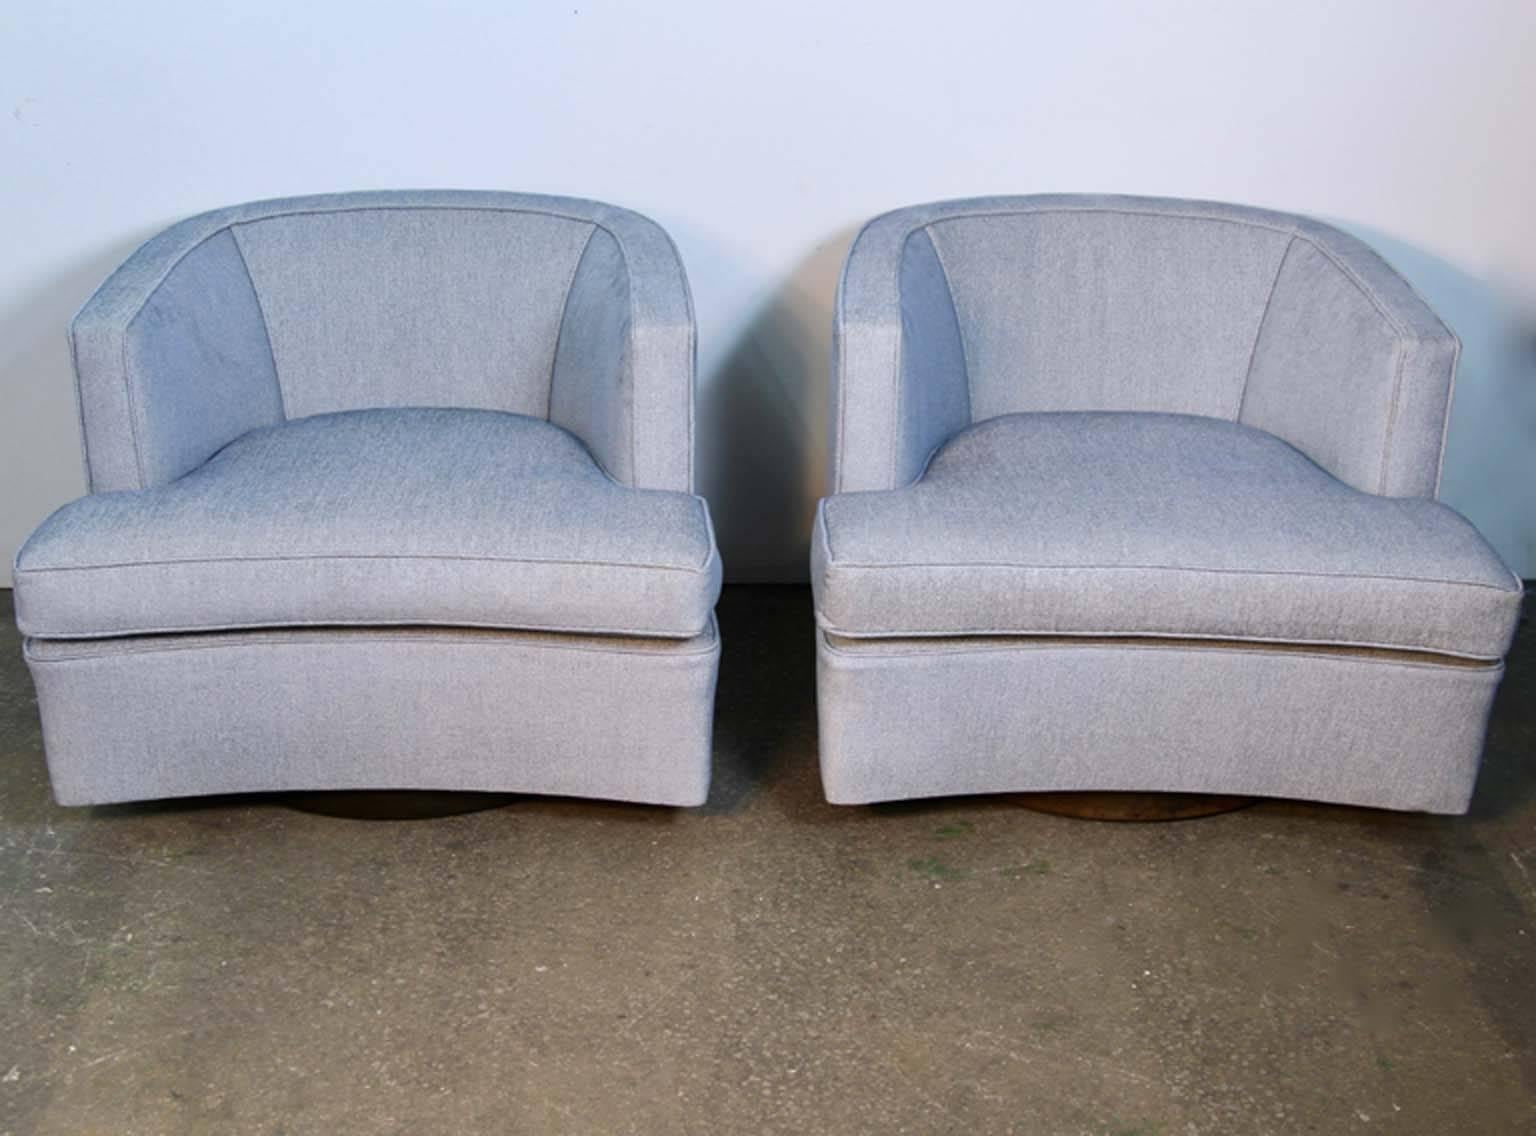 Pair of Harvey Probber chairs newly reupholstered. A fantastic design with a circular wooden base that both swivels and rolls. Amazingly comfortable and stylish. Just reupholstered.